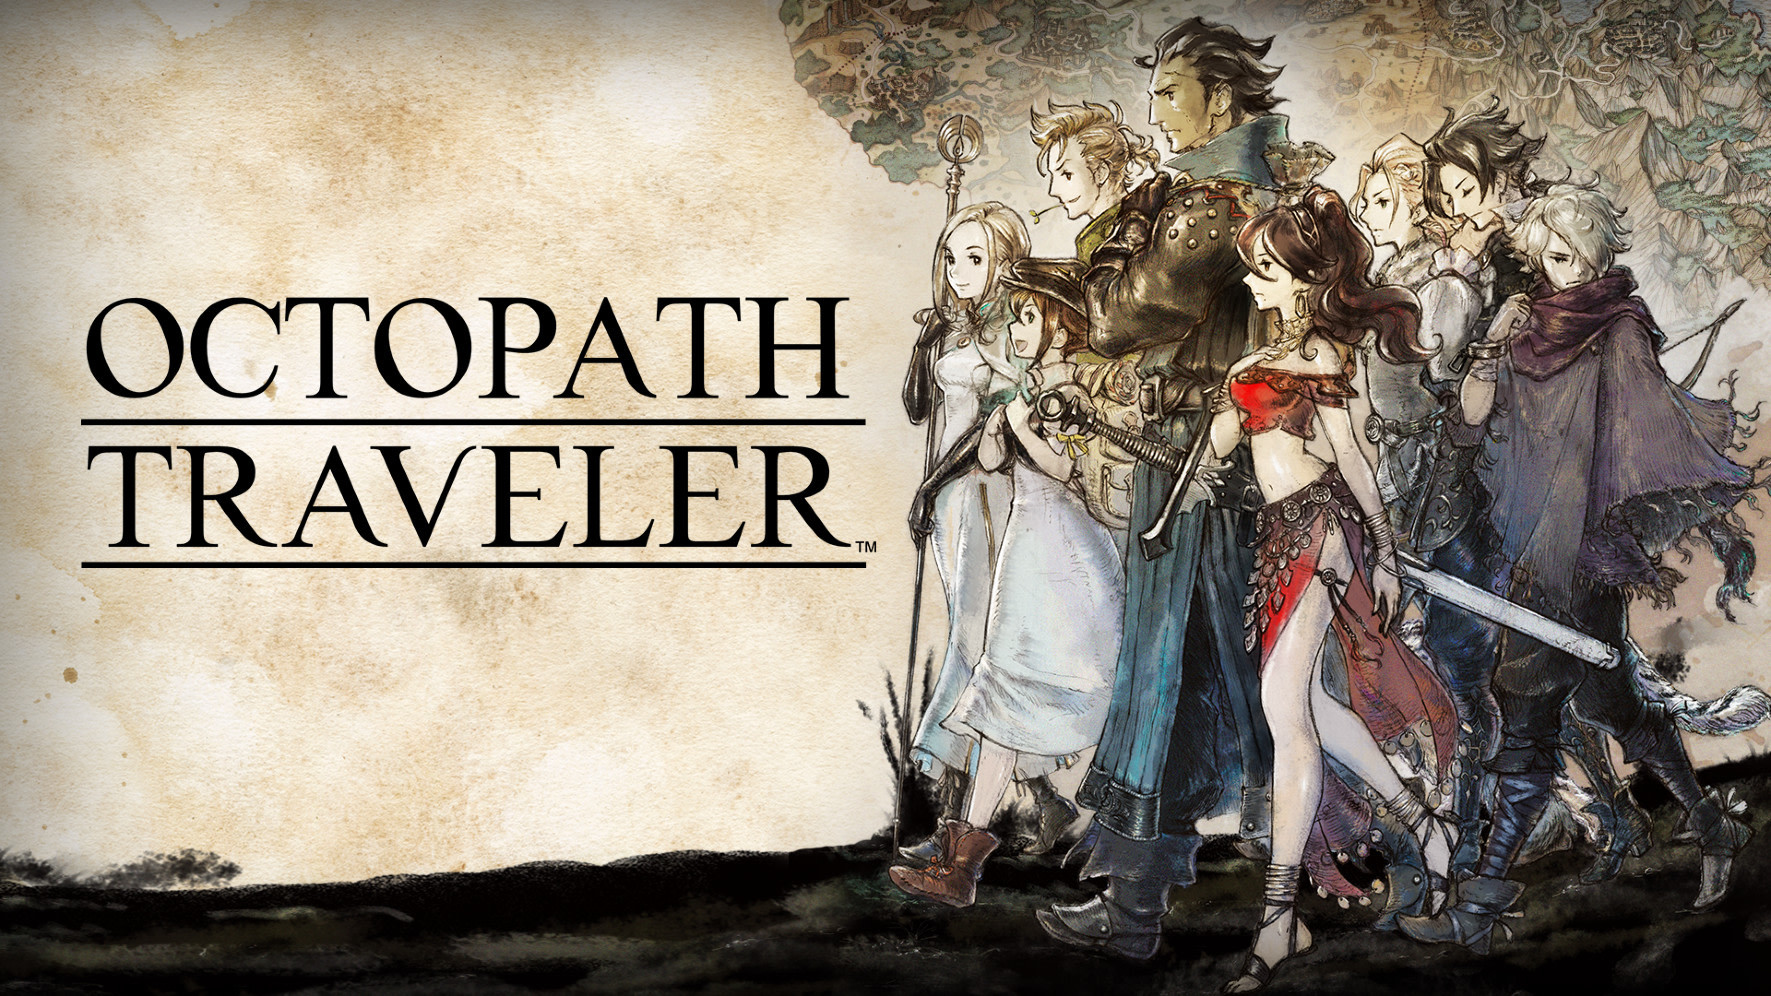 download octopath traveler steam for free